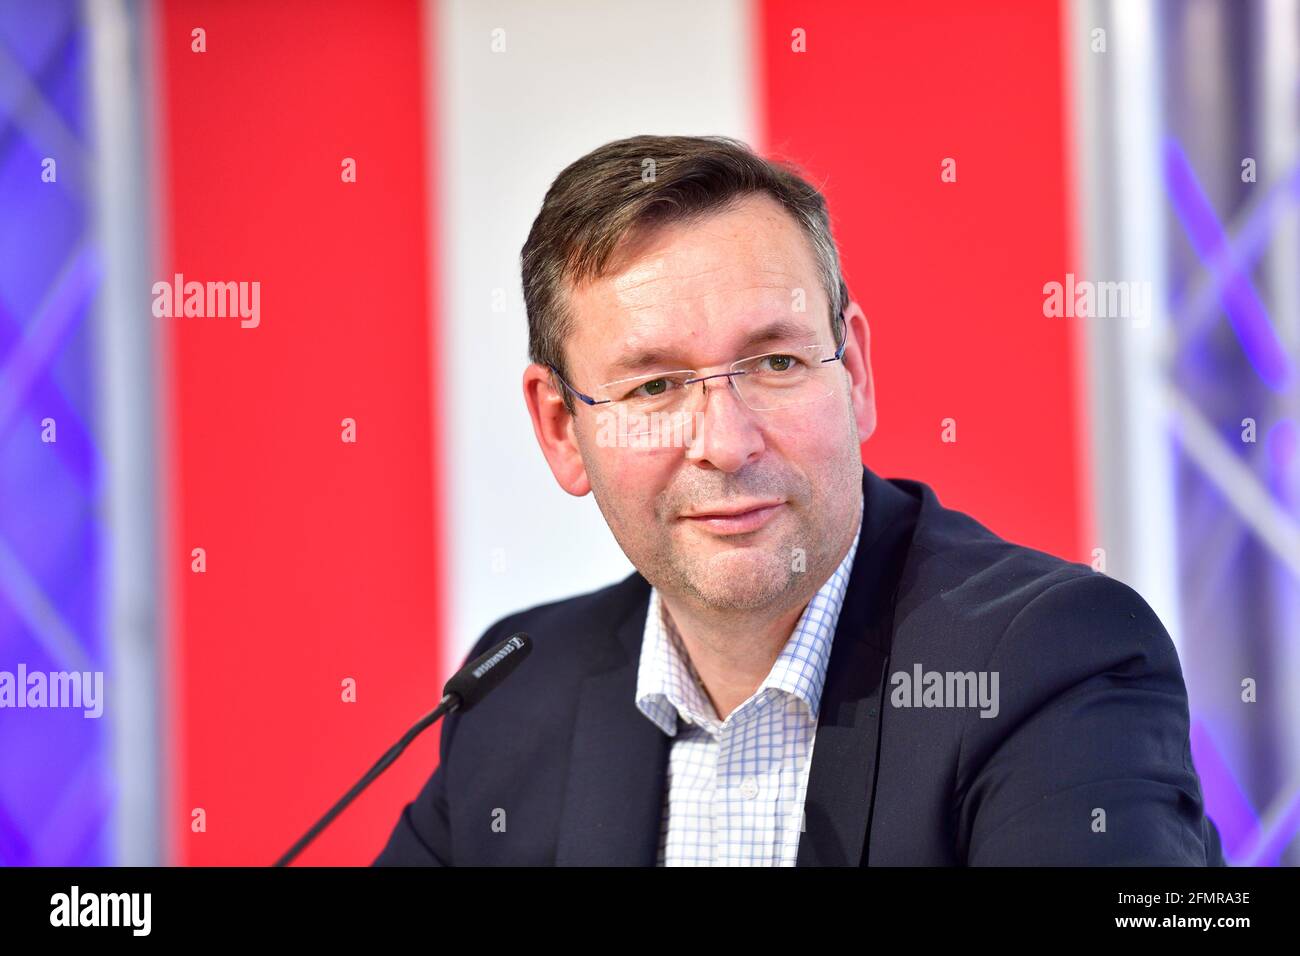 Vienna, Austria. May 11, 2021. Press conference with education spokesman Hermann Brückl (FPÖ) on current topics in the FPÖ media center. Stock Photo